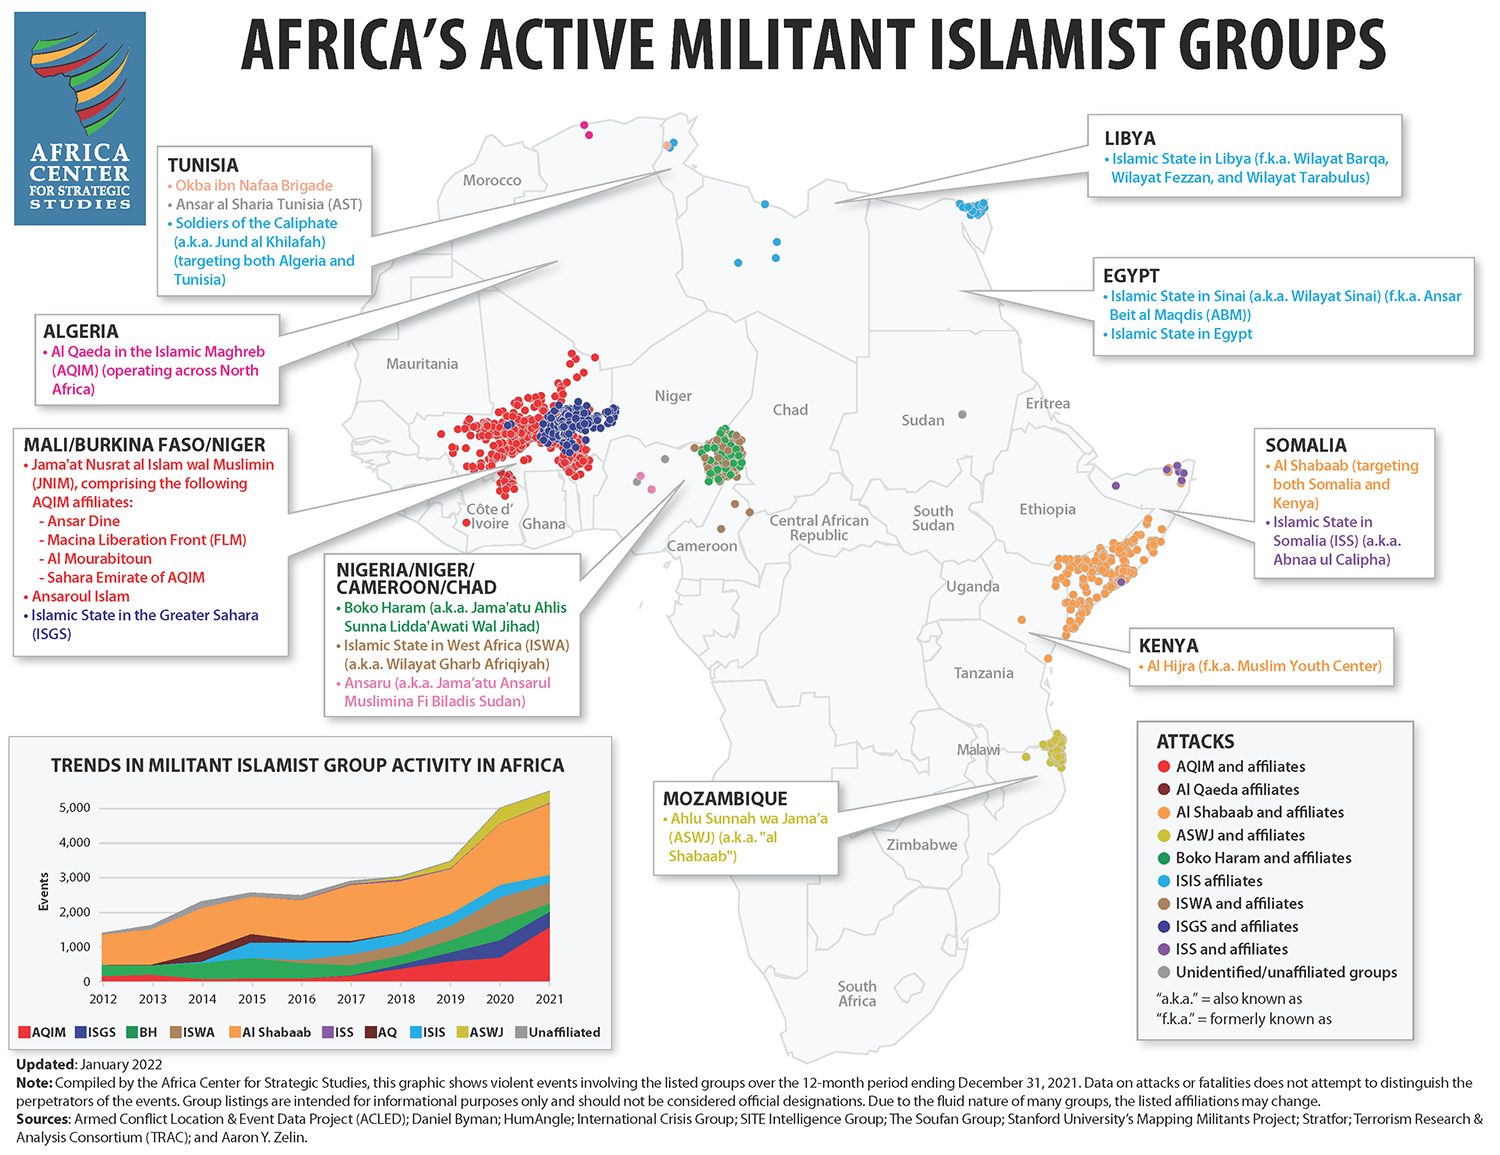 Map - Africa's Active Militant Islamist Groups, January 2022